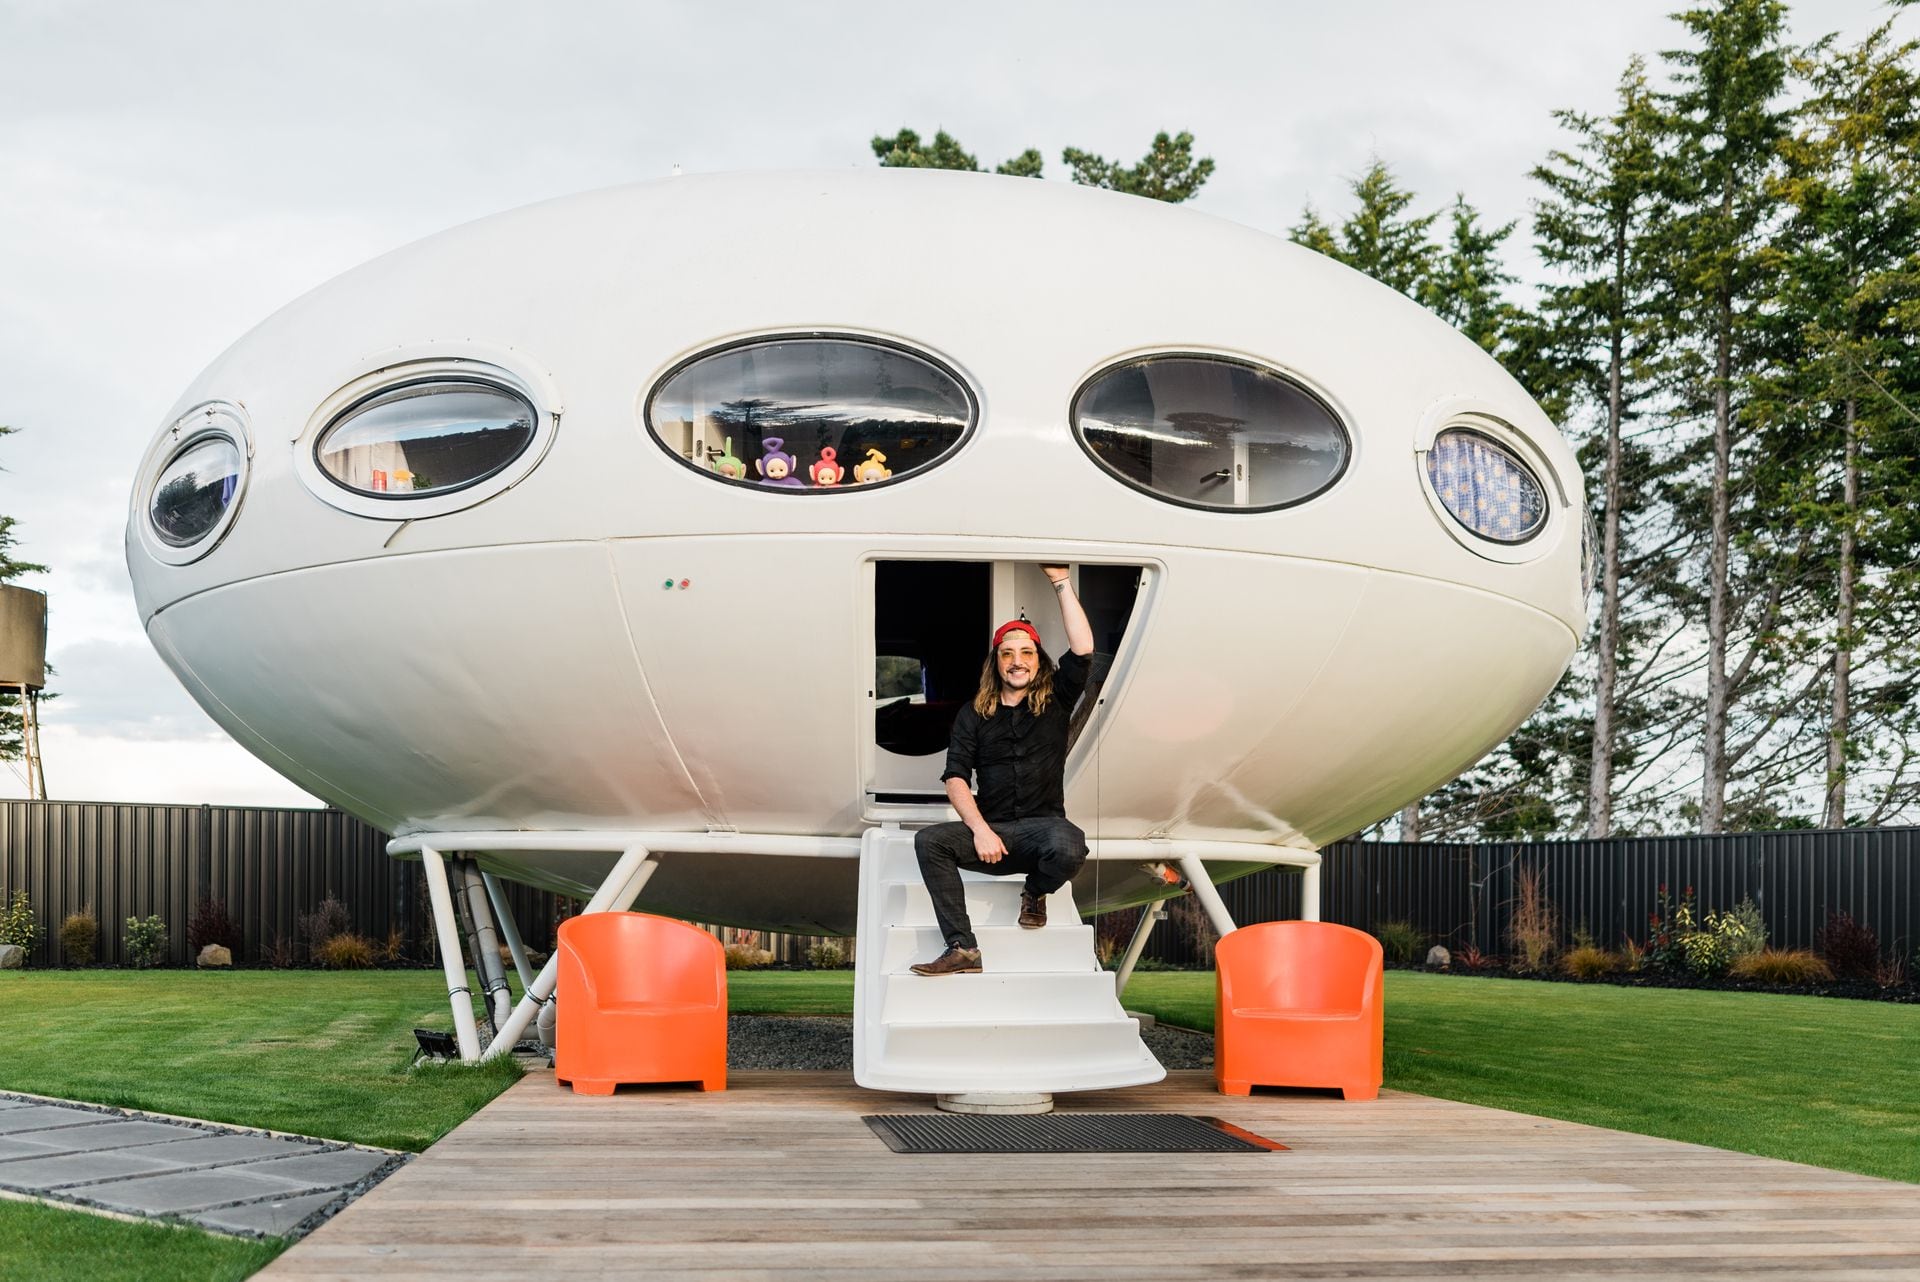 How the Futuro UFO house landed in New Zealand - NZ Herald